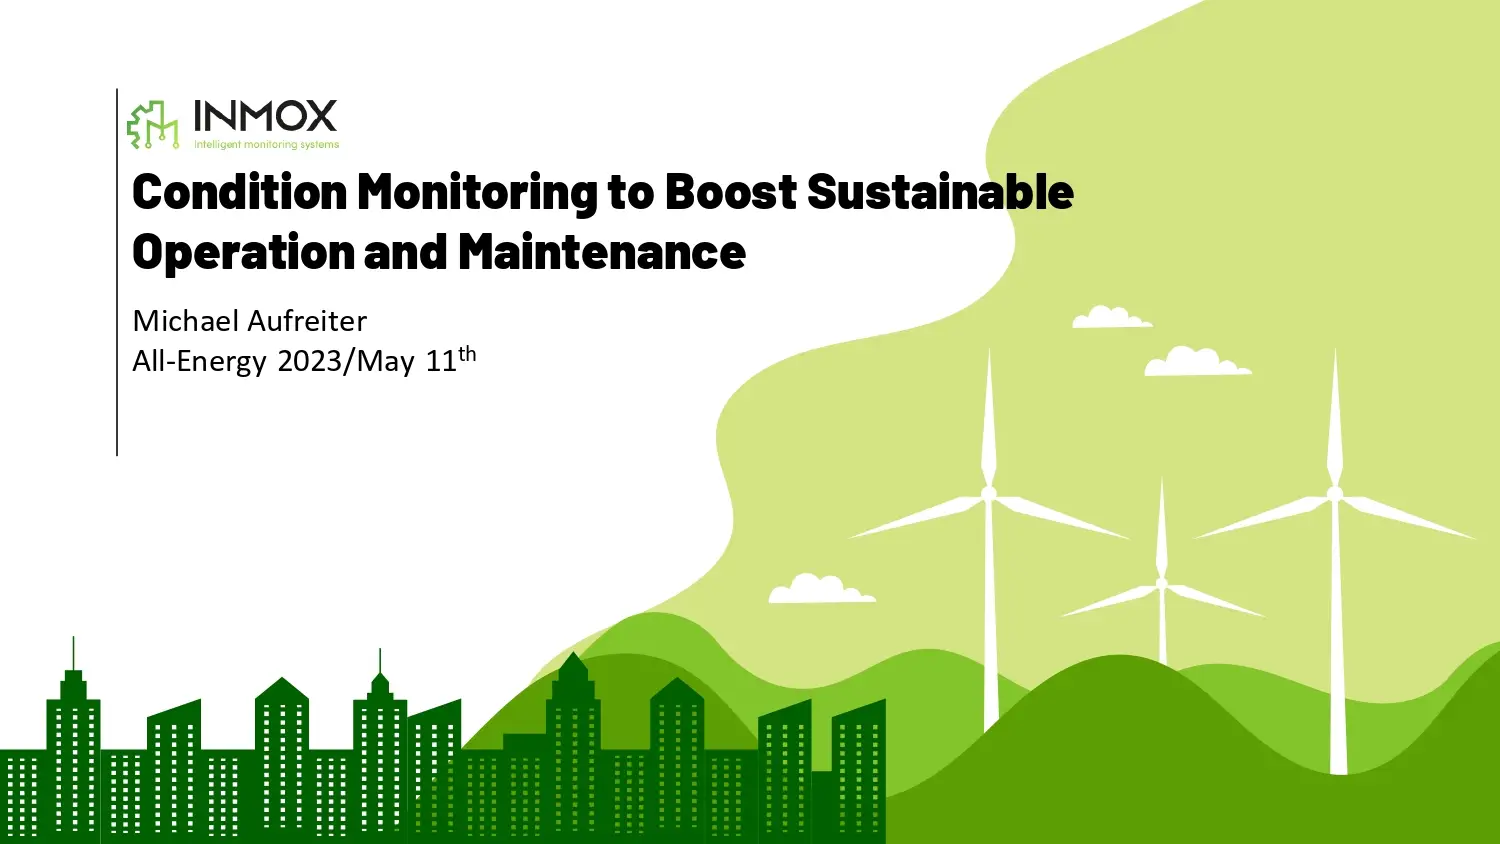 Condition Monitoring to Boost Sustainable Operation and Maintenance